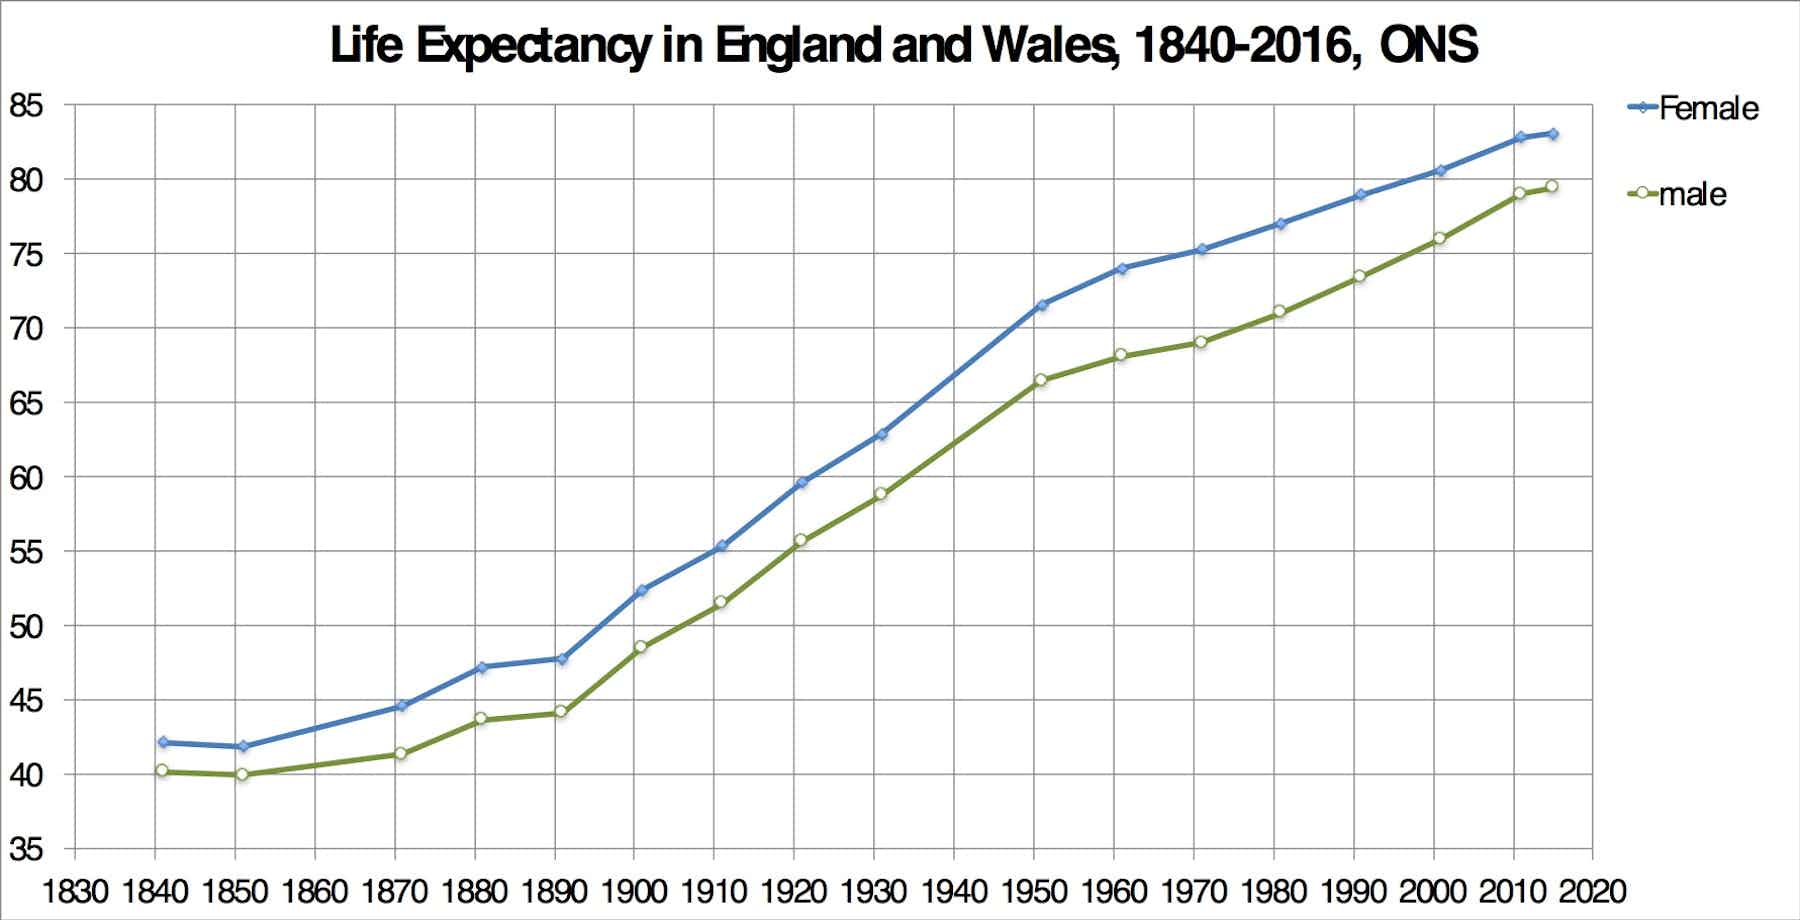 Life expectancy in Britain has fallen so much that a million years of